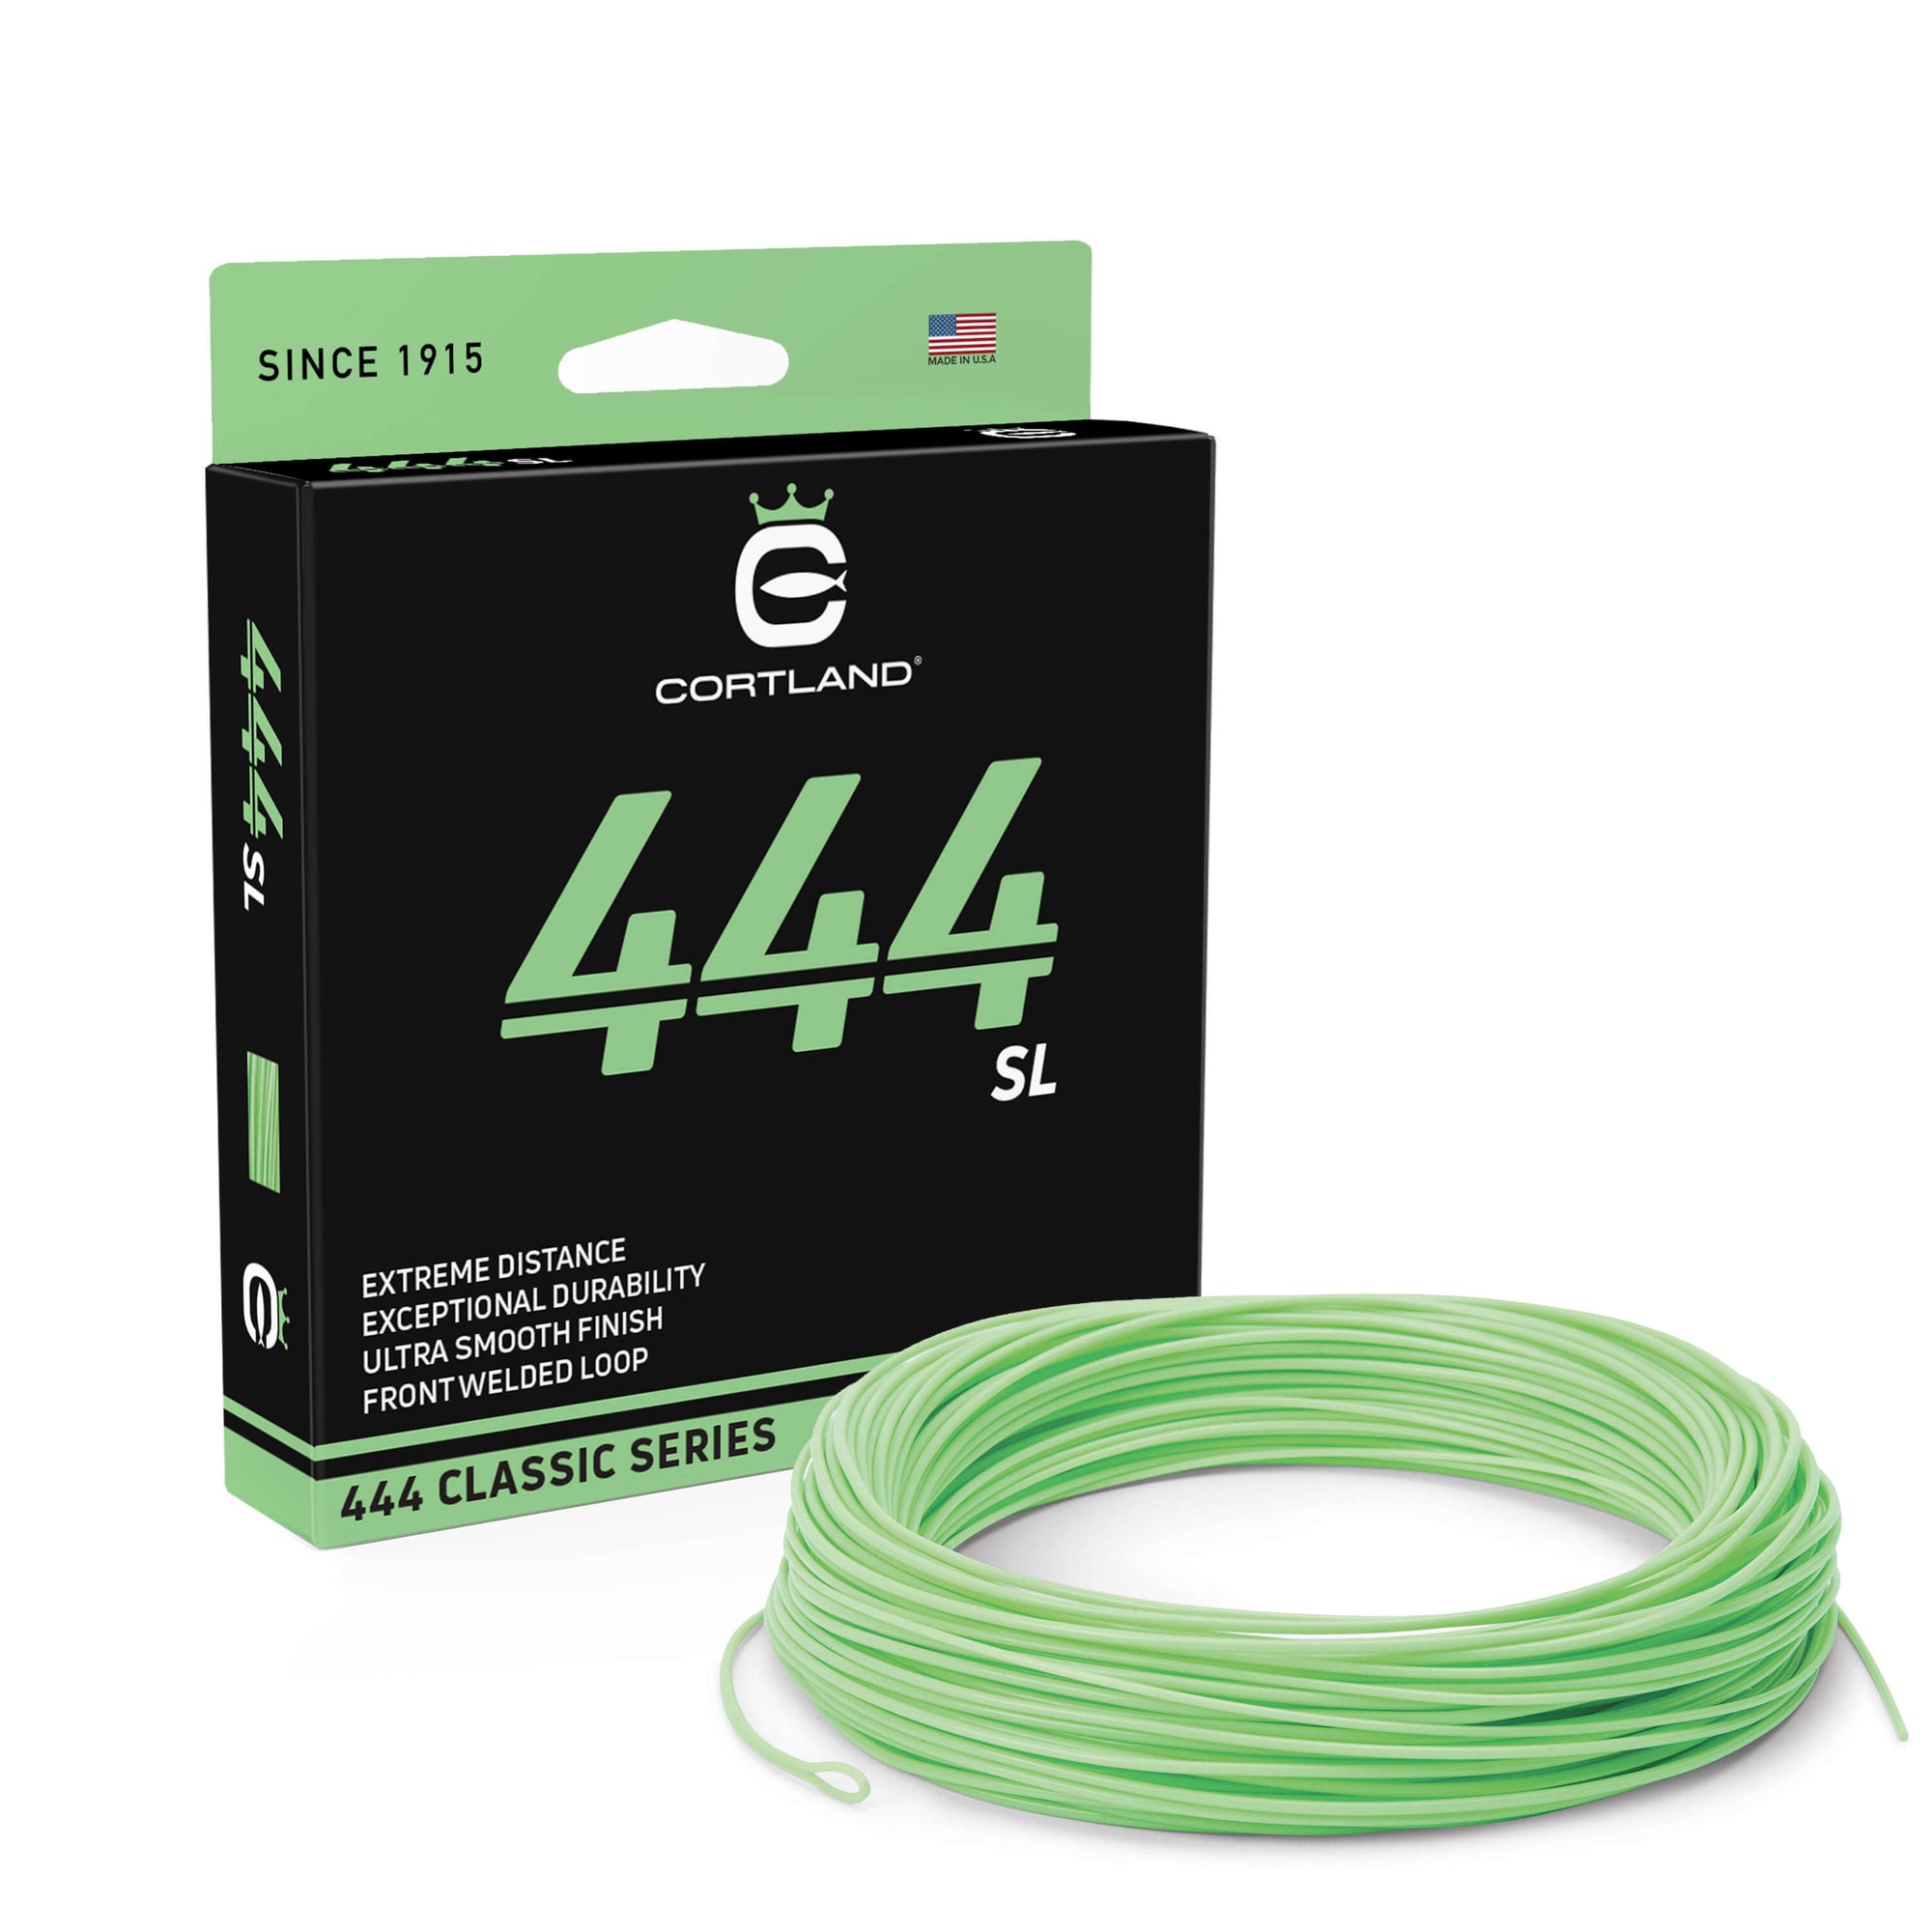 444 Series SL Fly Line Box and coil. The coil is mint green. The box is black and mint green.